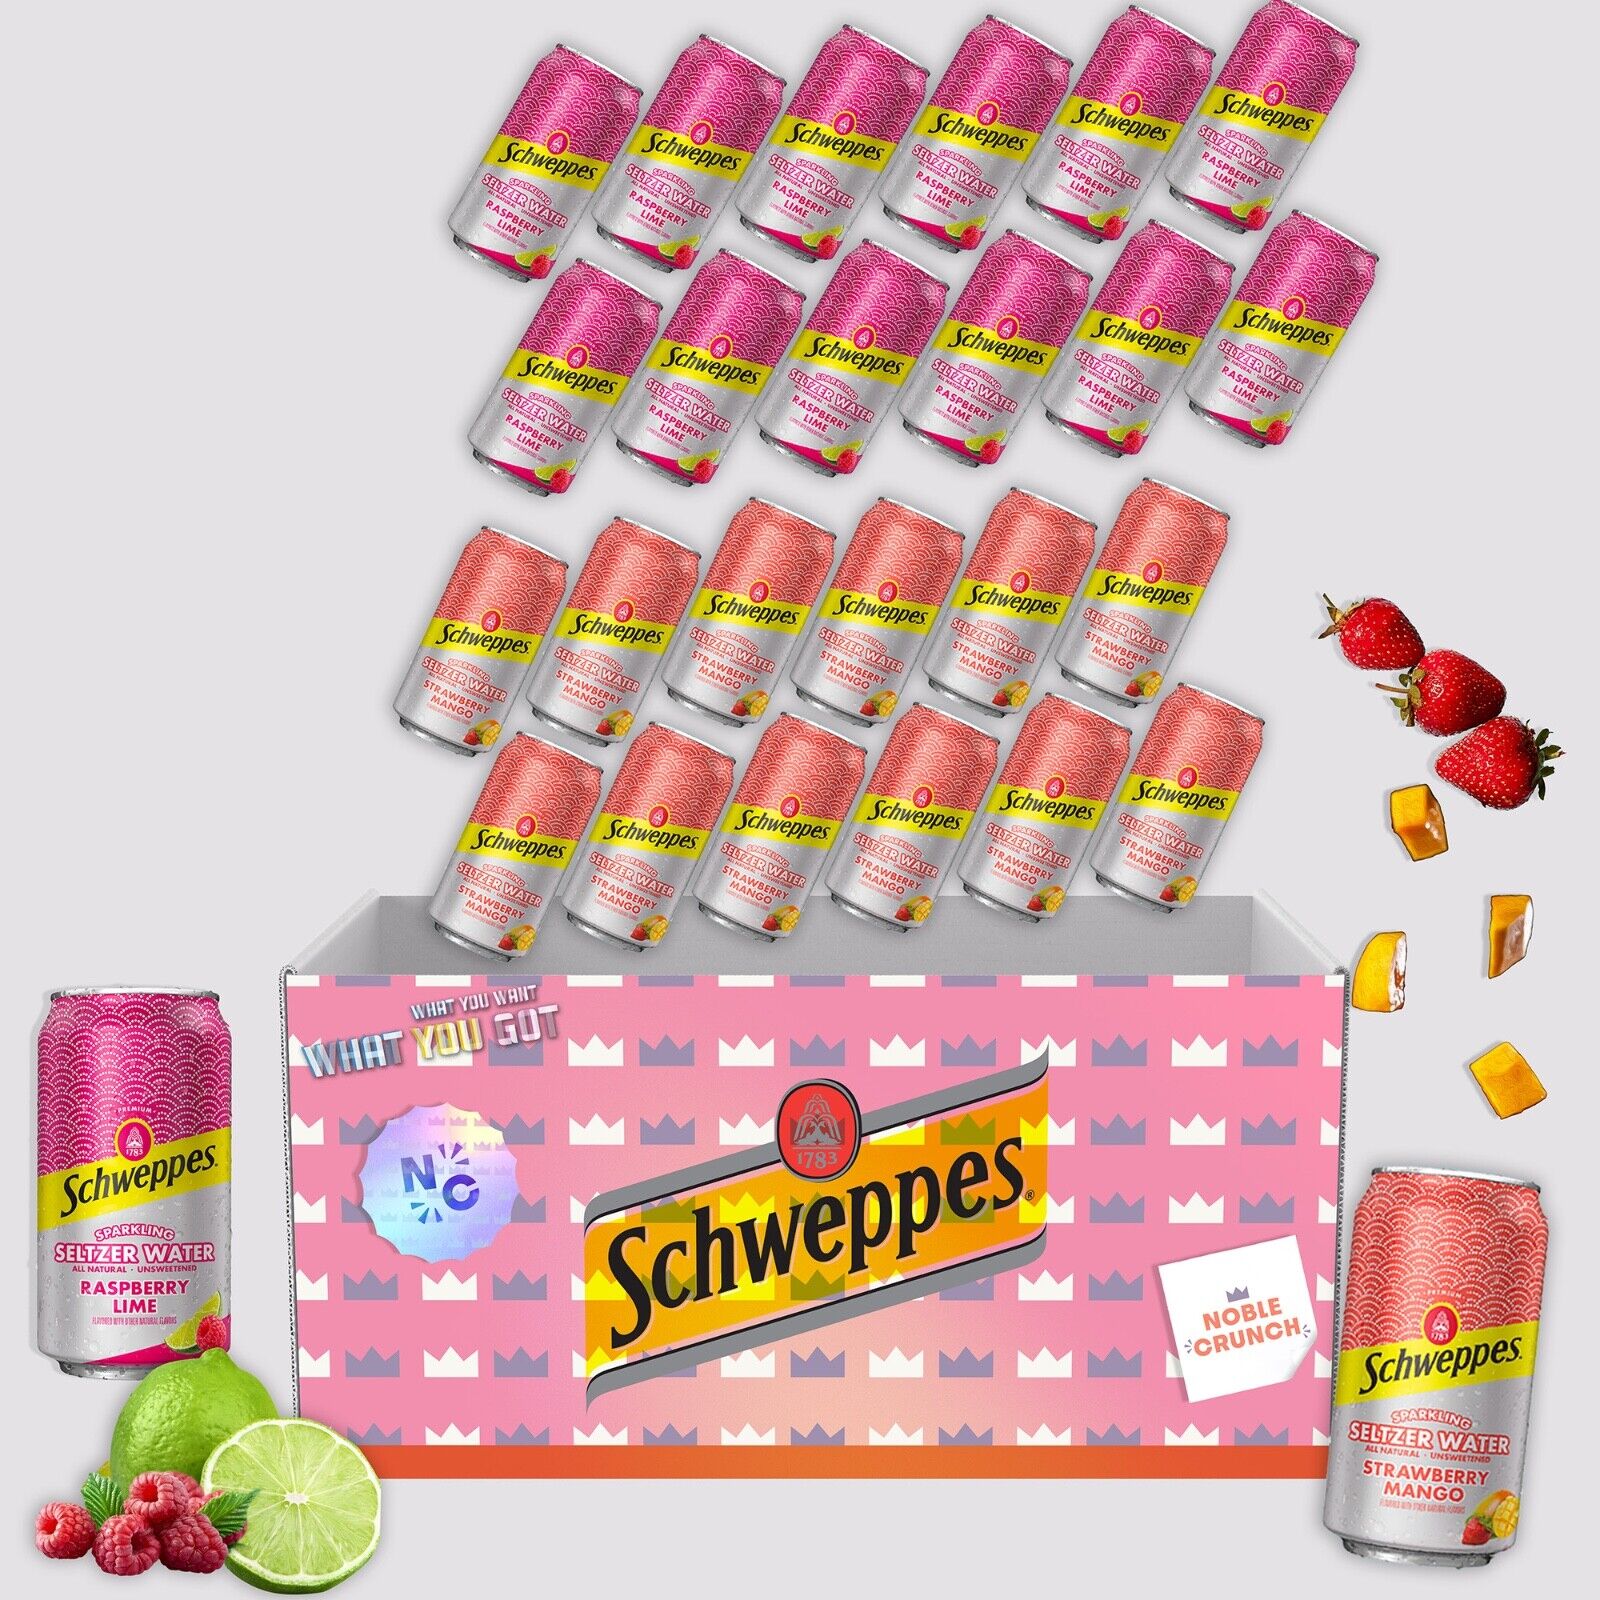 Raspberry Lime Seltzer (12 cans) - Strawberry Mango Seltzer (12 can) - 24 Cans